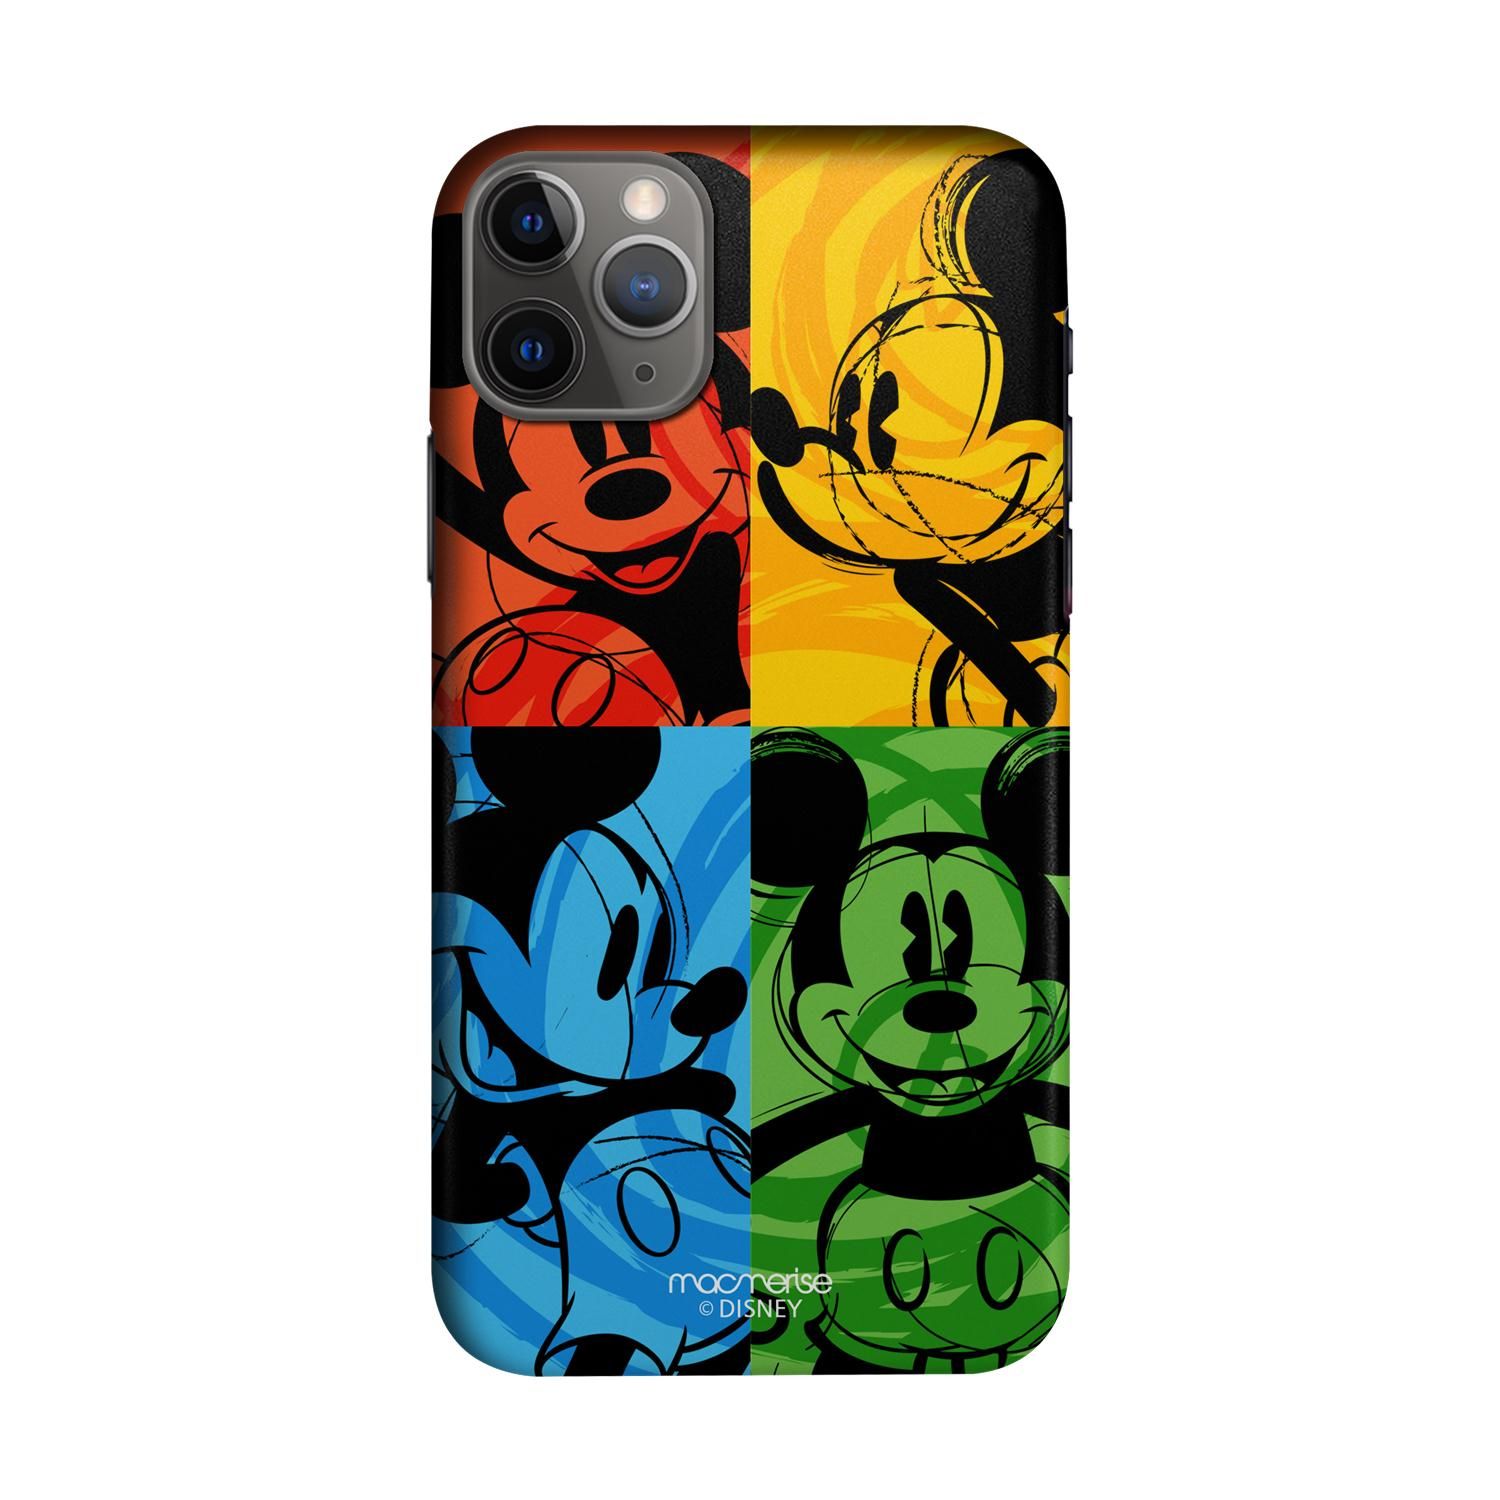 Shades of Mickey - Sleek Phone Case for iPhone 11 Pro Max